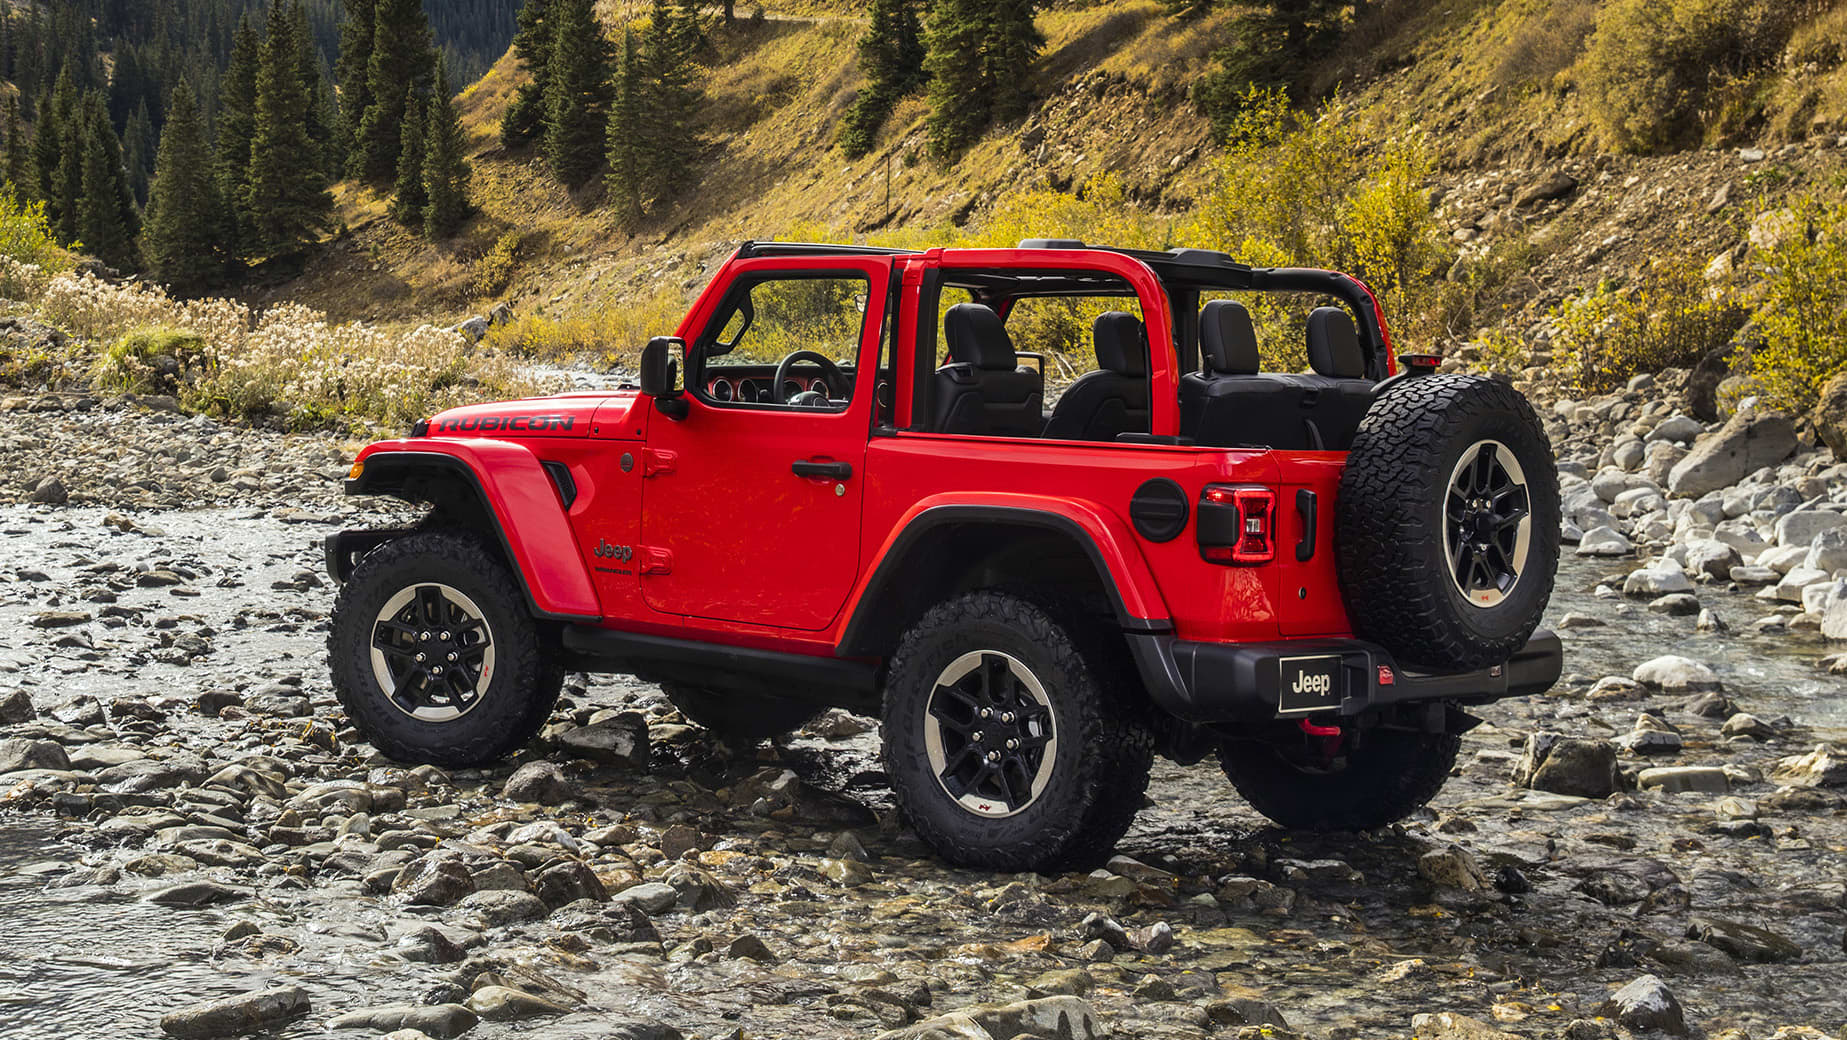 2020 Jeep Wrangler Review | Price, specs, features and photos | Autoblog